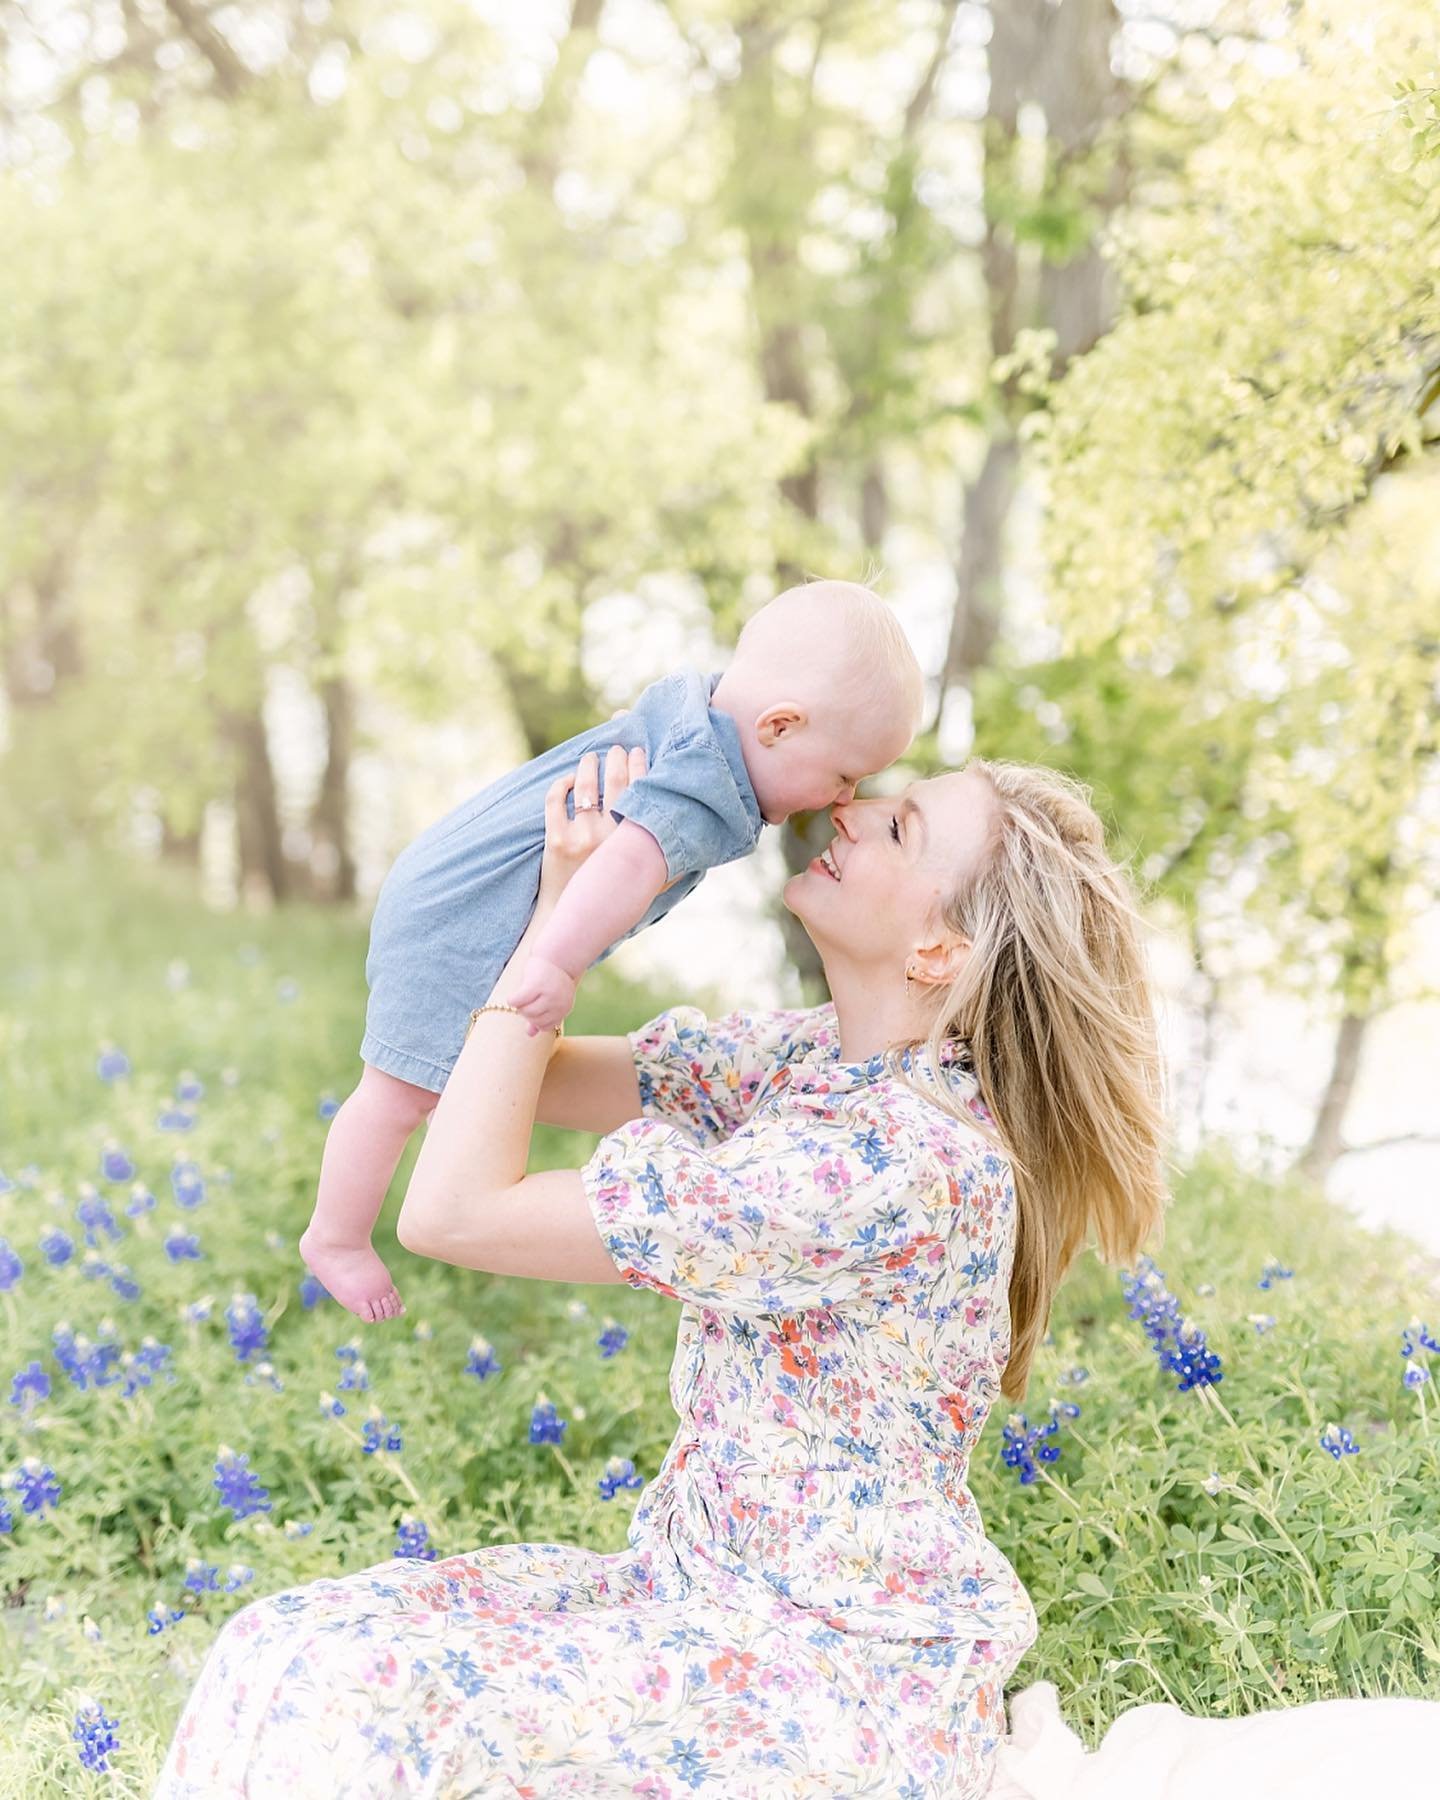 Bluebonnet portrait galleries are starting to be delivered this week, and I&rsquo;m loving it! Capturing timeless family memories amidst the iconic Texas bluebonnets has been pure joy 💙
.
.
.
.
.
#dallasfamilyphotographer #dfwfamilyphotographer #for